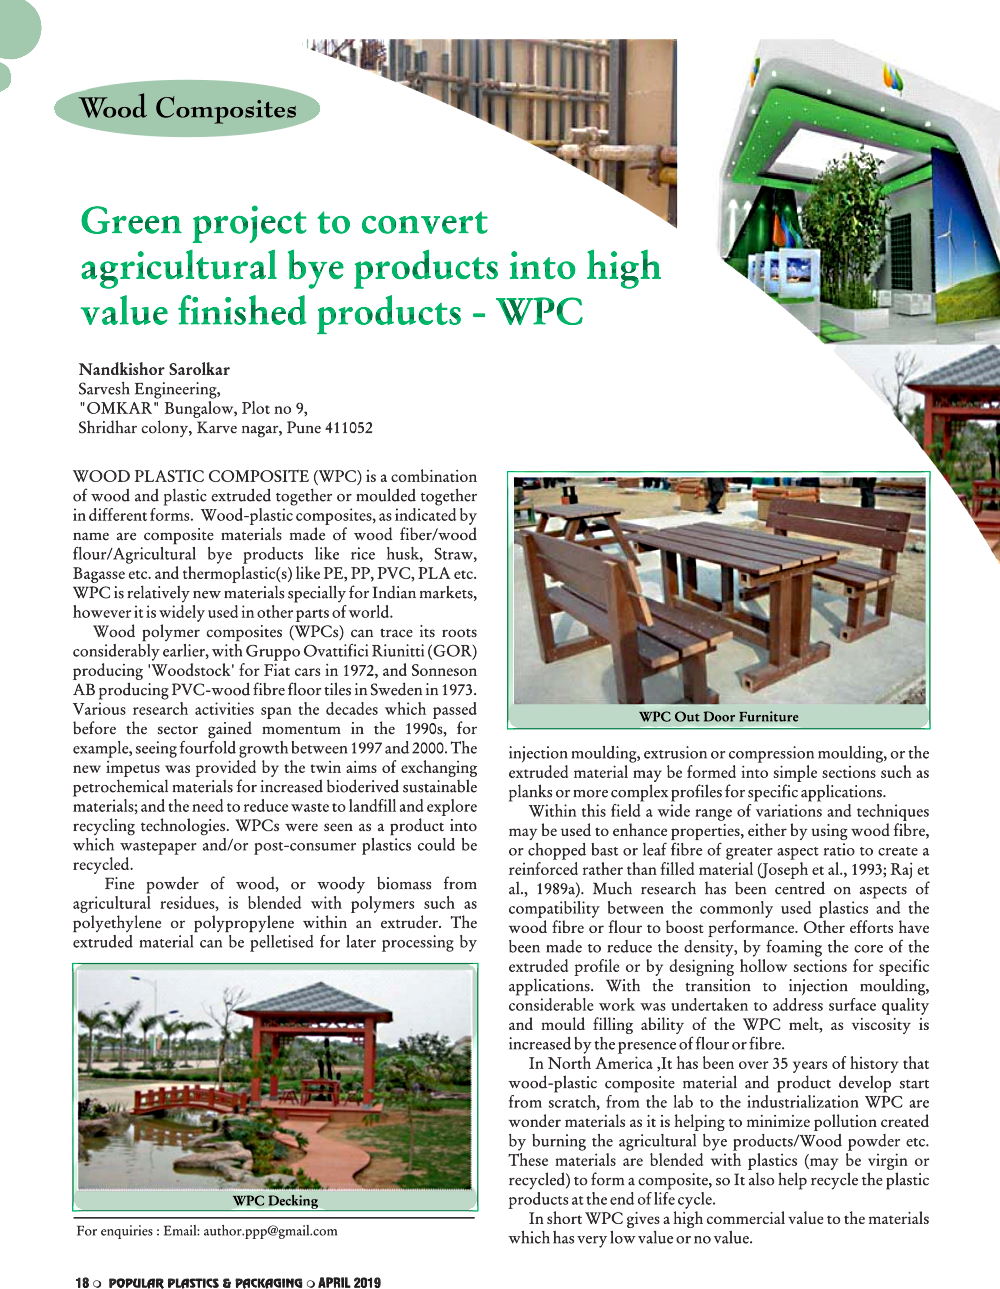 Green project to convert agricultural bye products